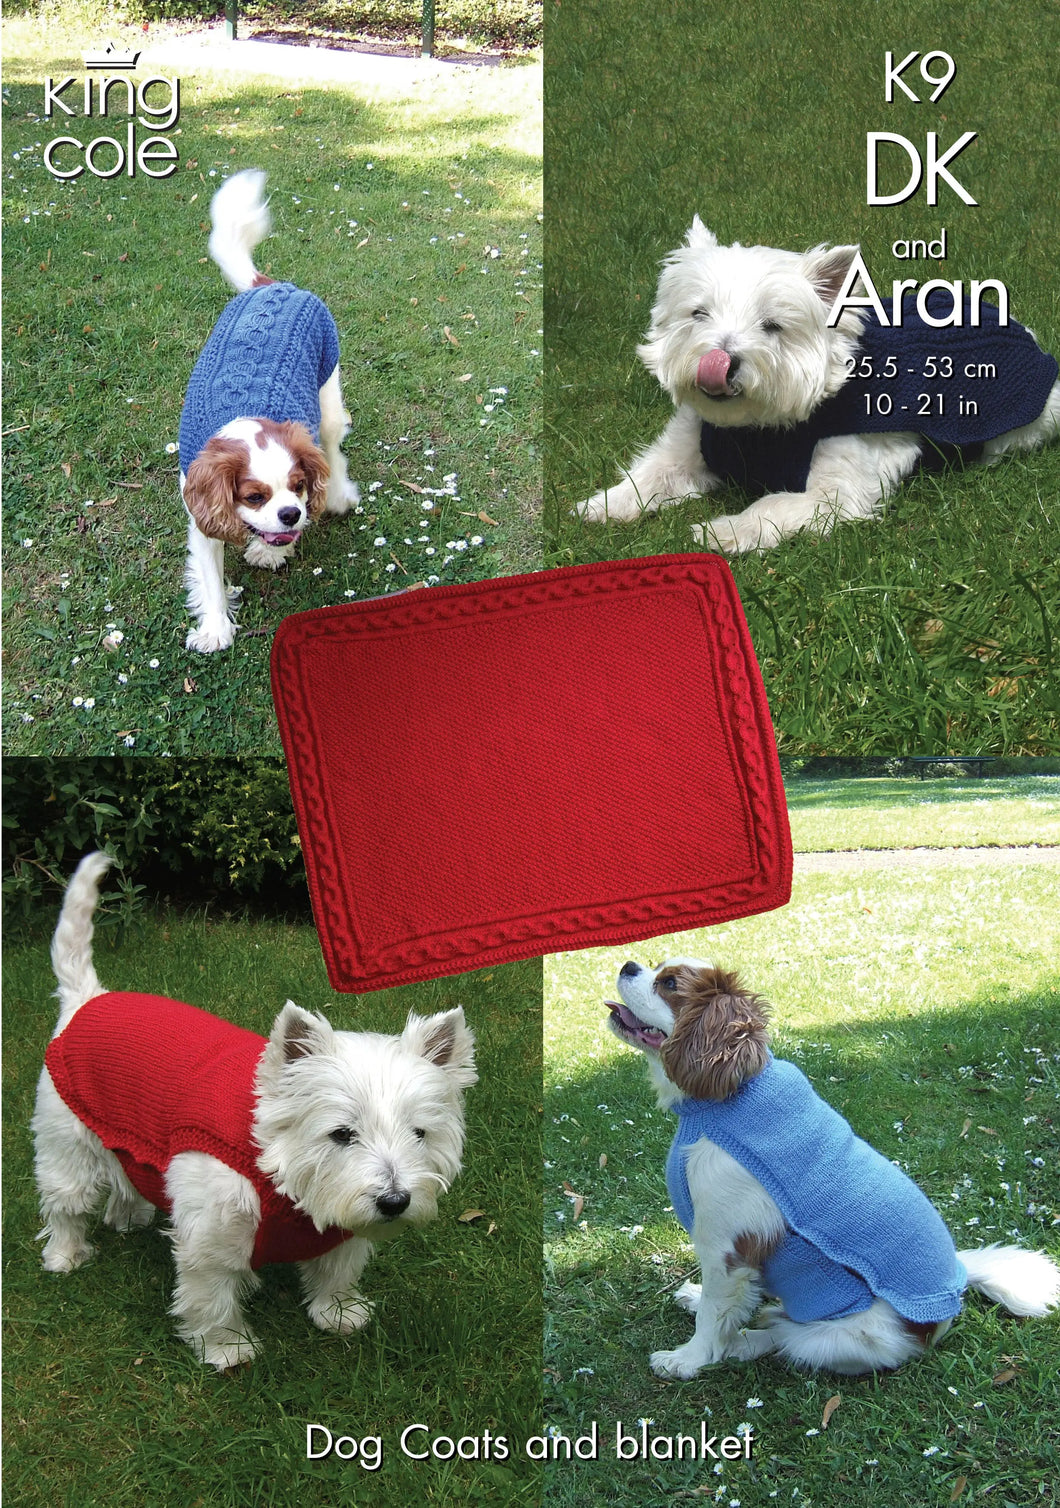 Dog Coats and Blankets Knitted with Big Value DK and Big Value Aran K9